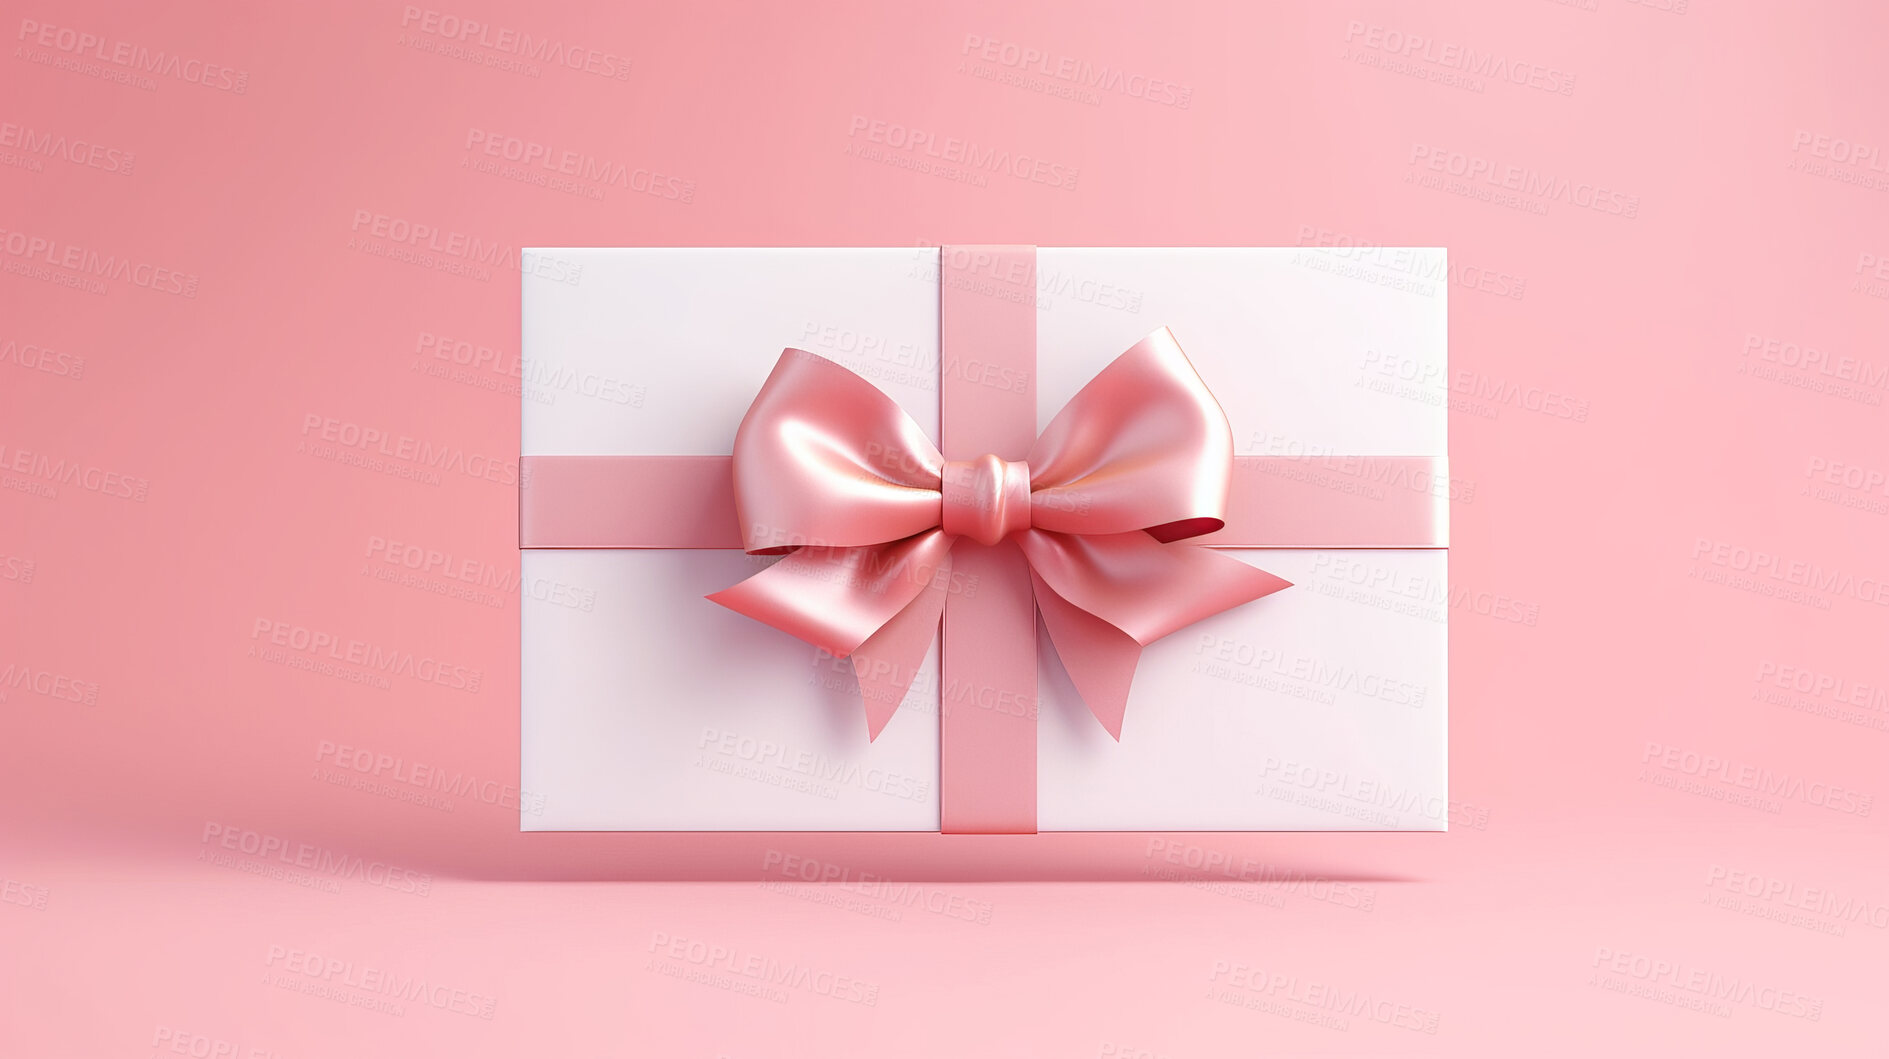 Buy stock photo Box, gift and present with bow on pink background for surprise prize giving, celebration or party event. Bow, ribbon, wrapping paper and package for Christmas, birthday or special day giveaway.